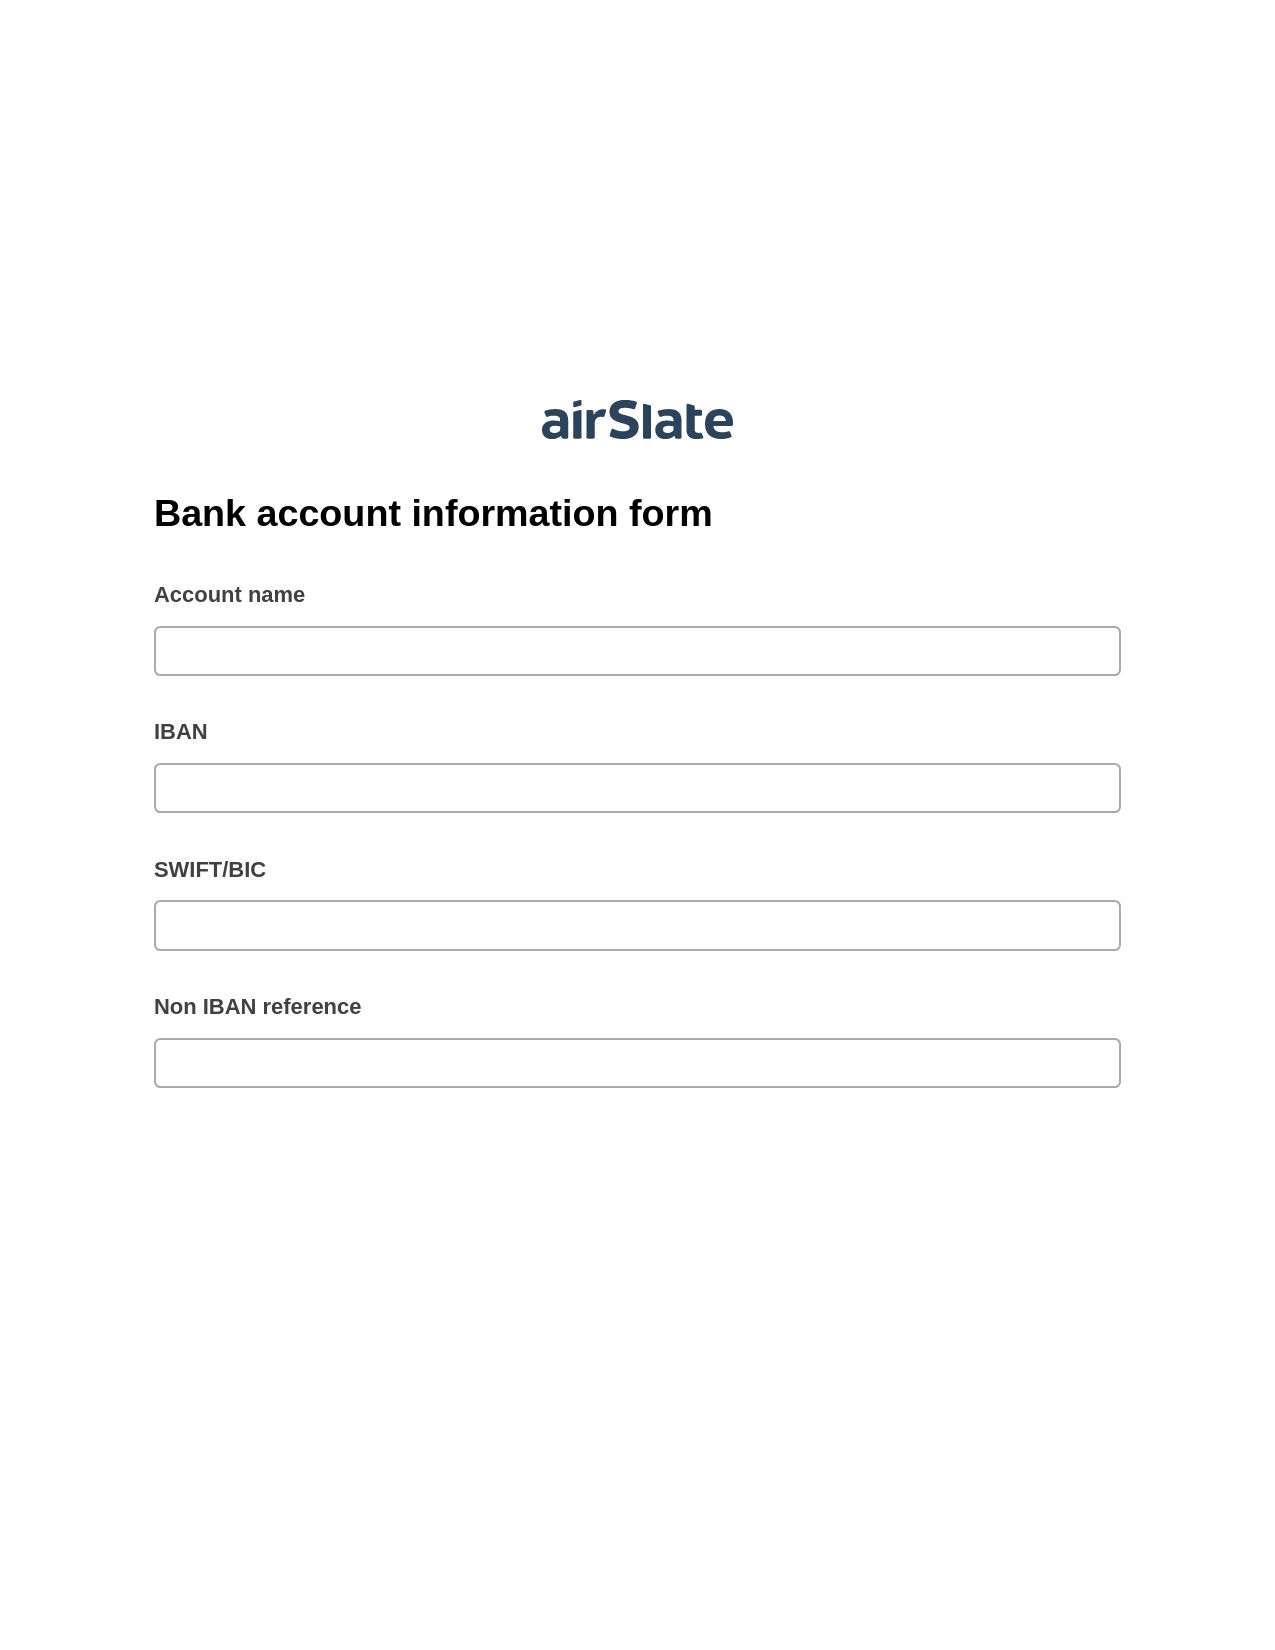 Multirole Bank account information form Pre-fill from Salesforce Record Bot, Document Hide Bot, Google Drive Bot